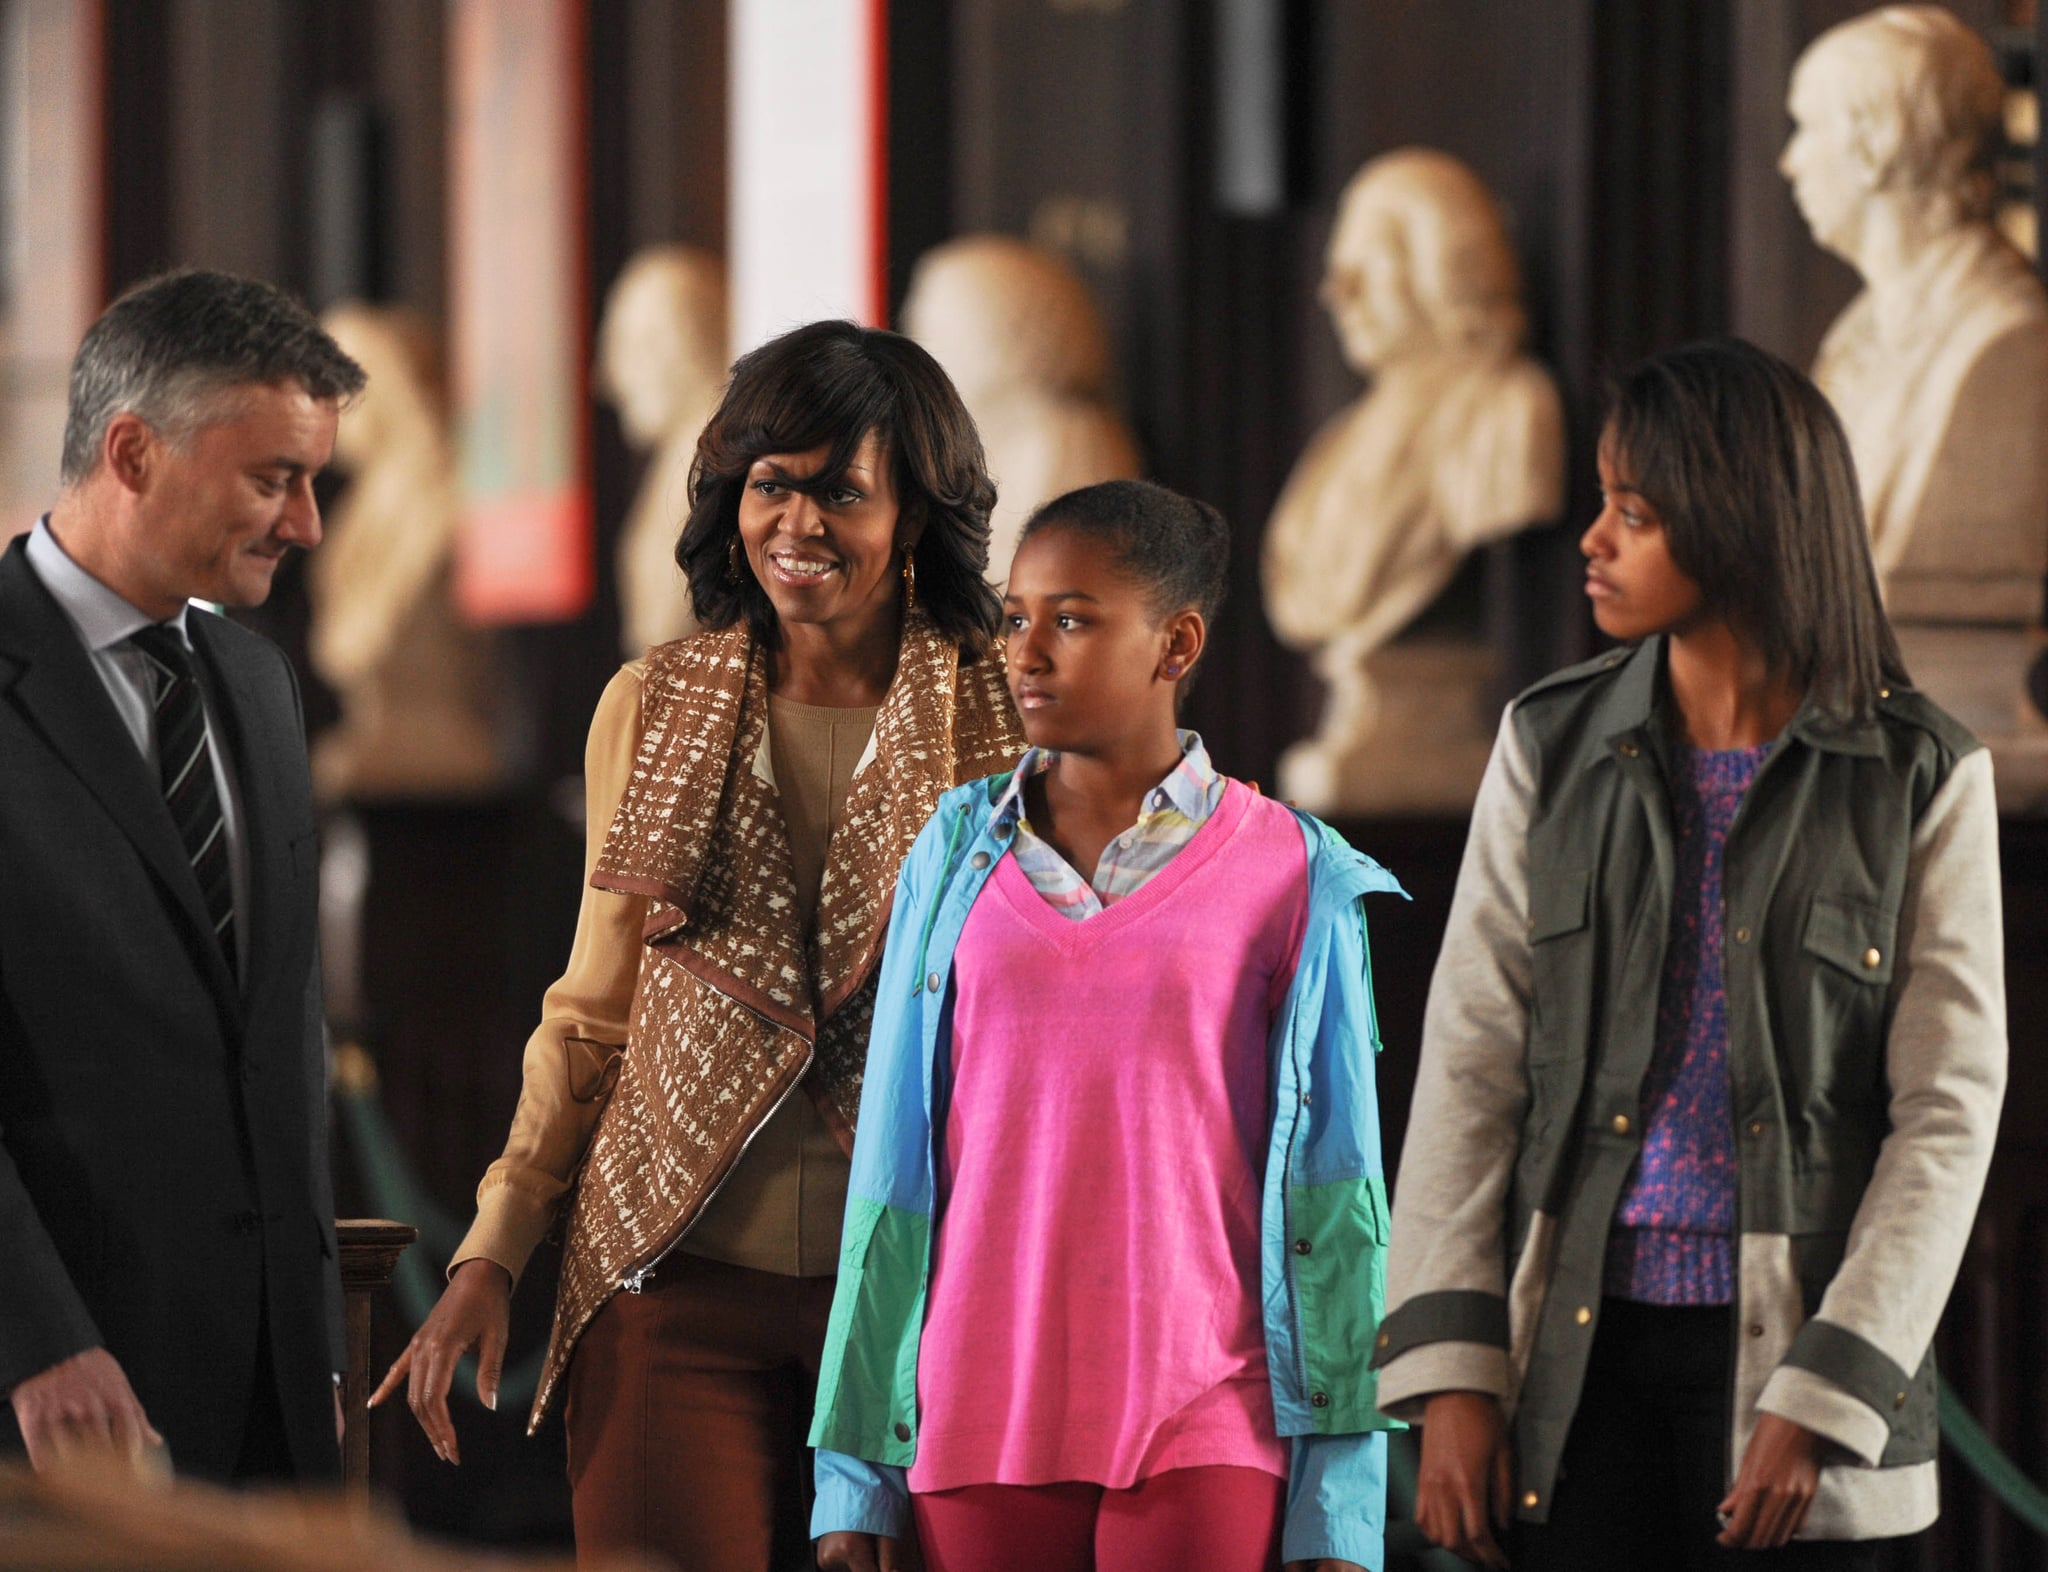 First Lady Michelle Obama toured the Old Library Building at Dublin's Trinity College with Sasha and Malia in June 2013. 